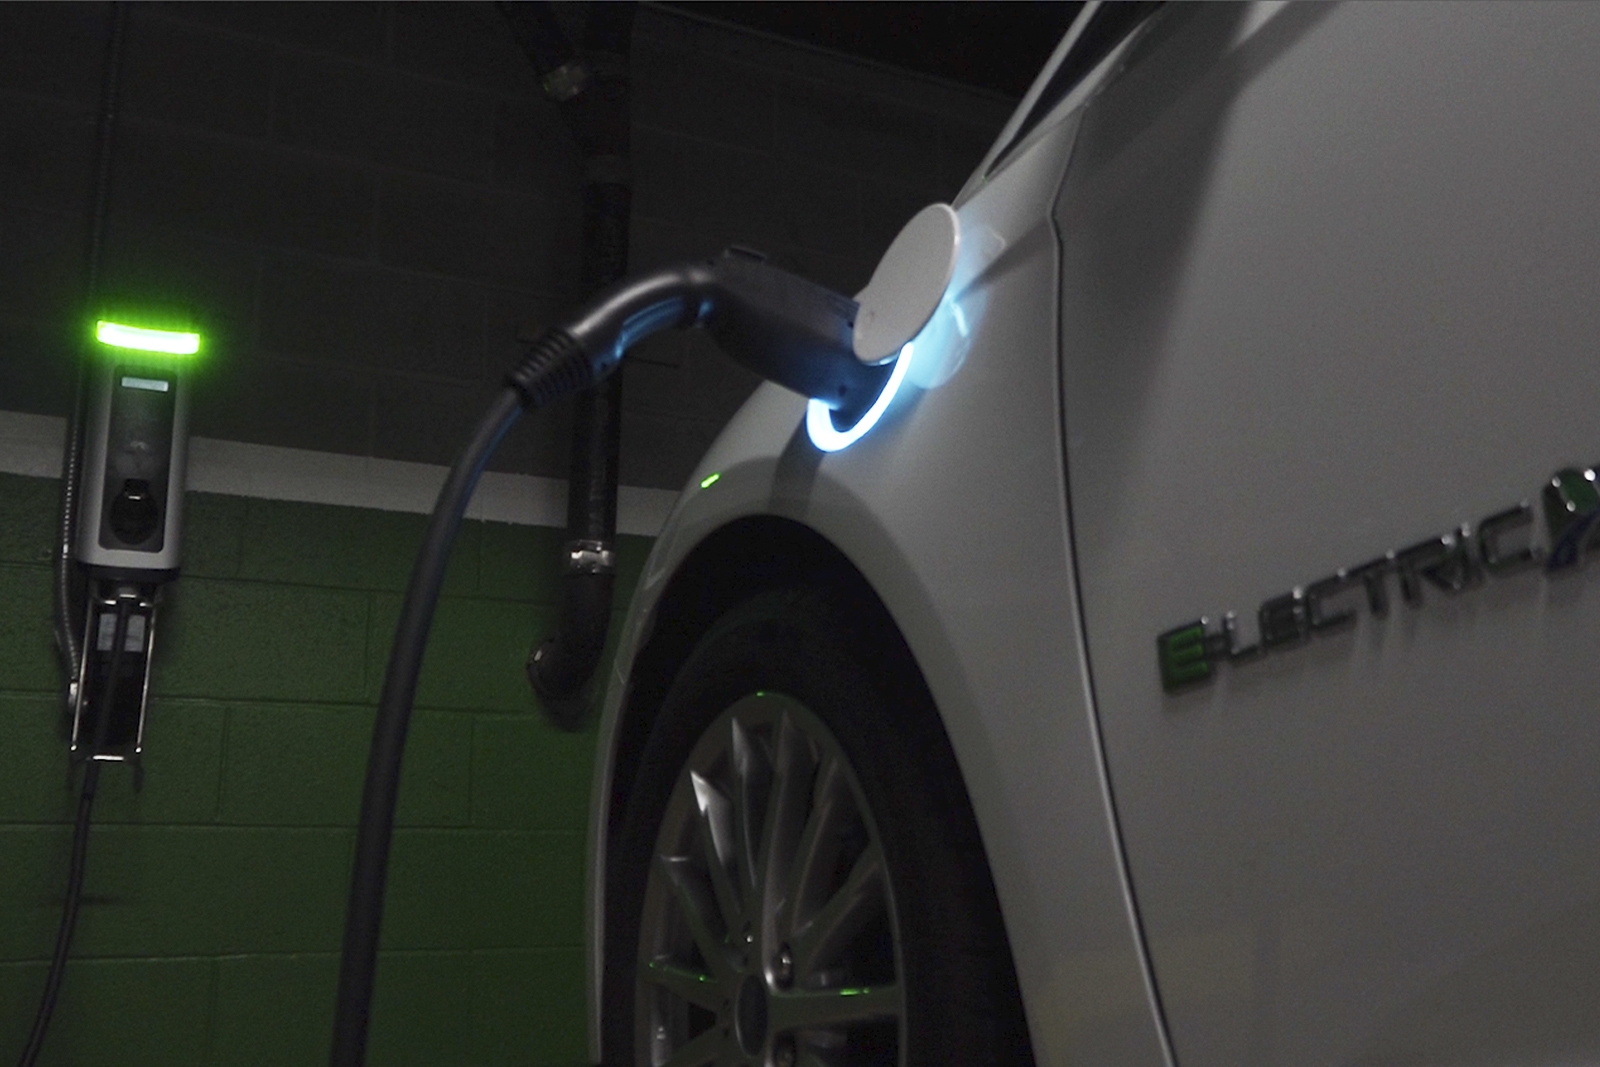 Is Richmond ready for electric vehicles? Richmond Confidential